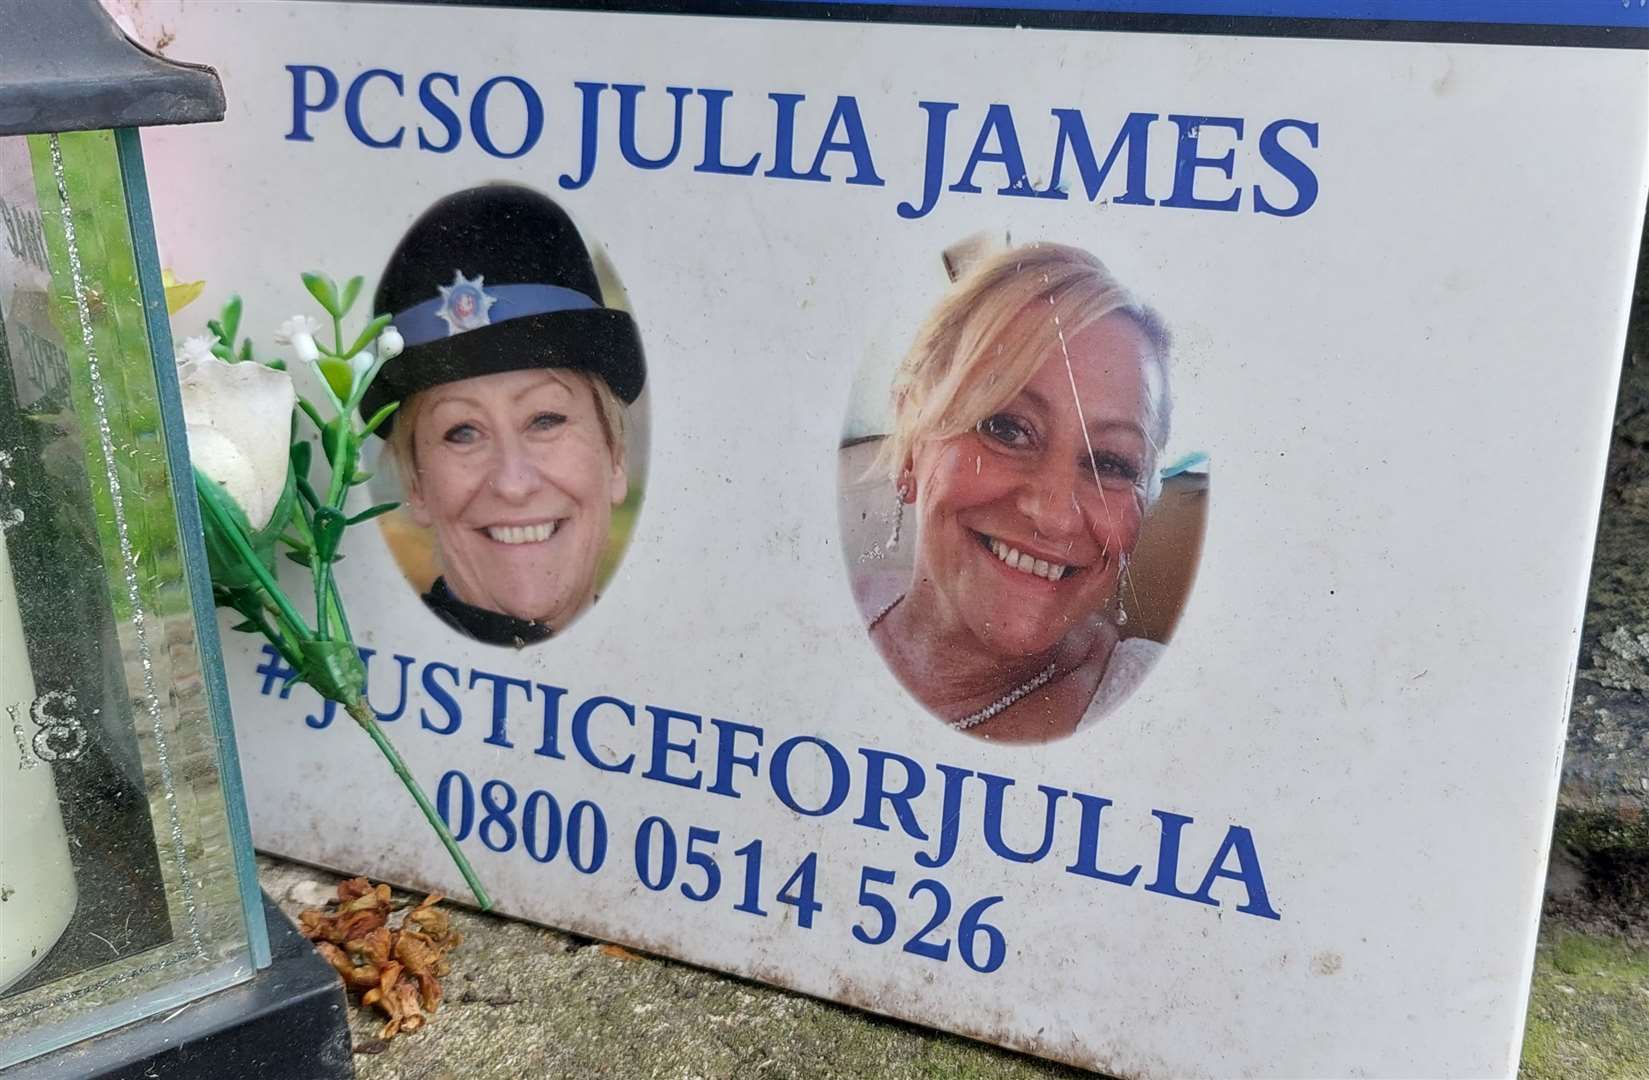 A plaque bearing Julia's photo has mysteriously disappeared